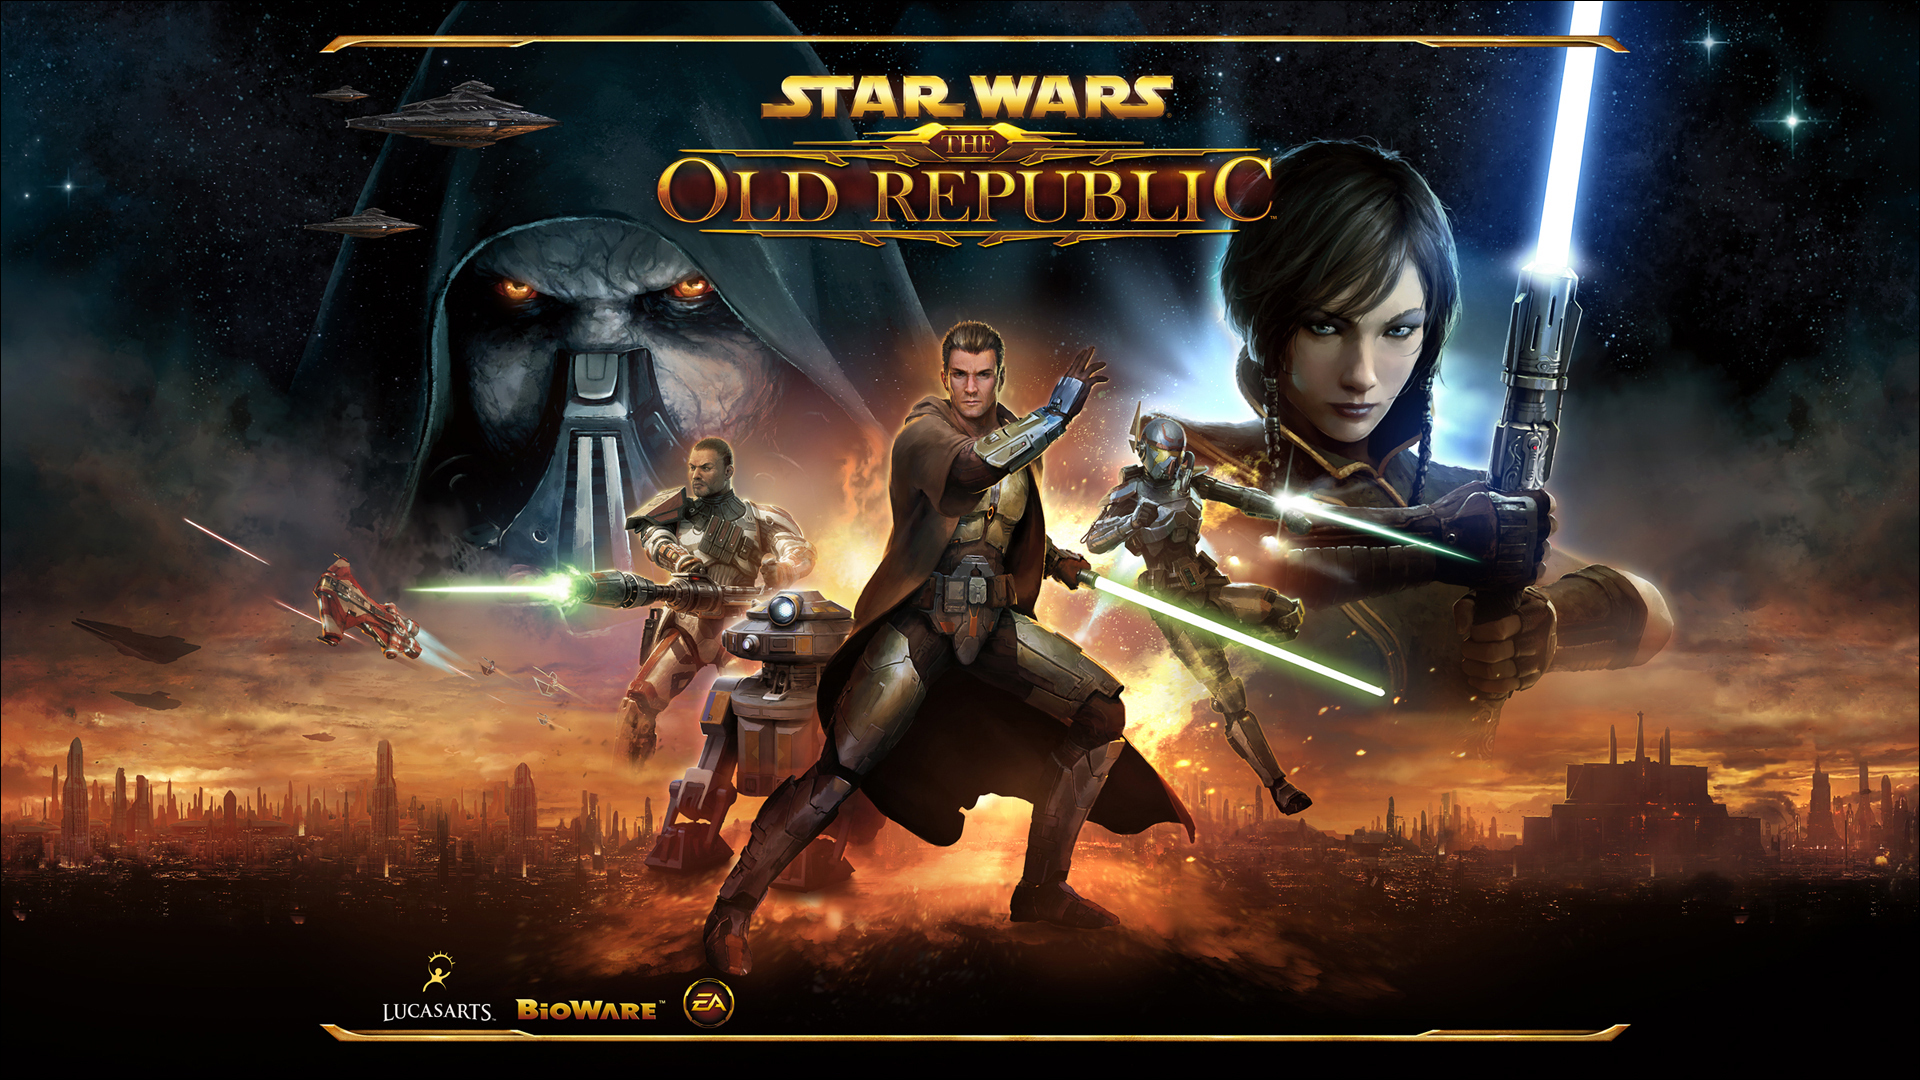 High Resolution Wallpaper | Star Wars: The Old Republic 1920x1080 px